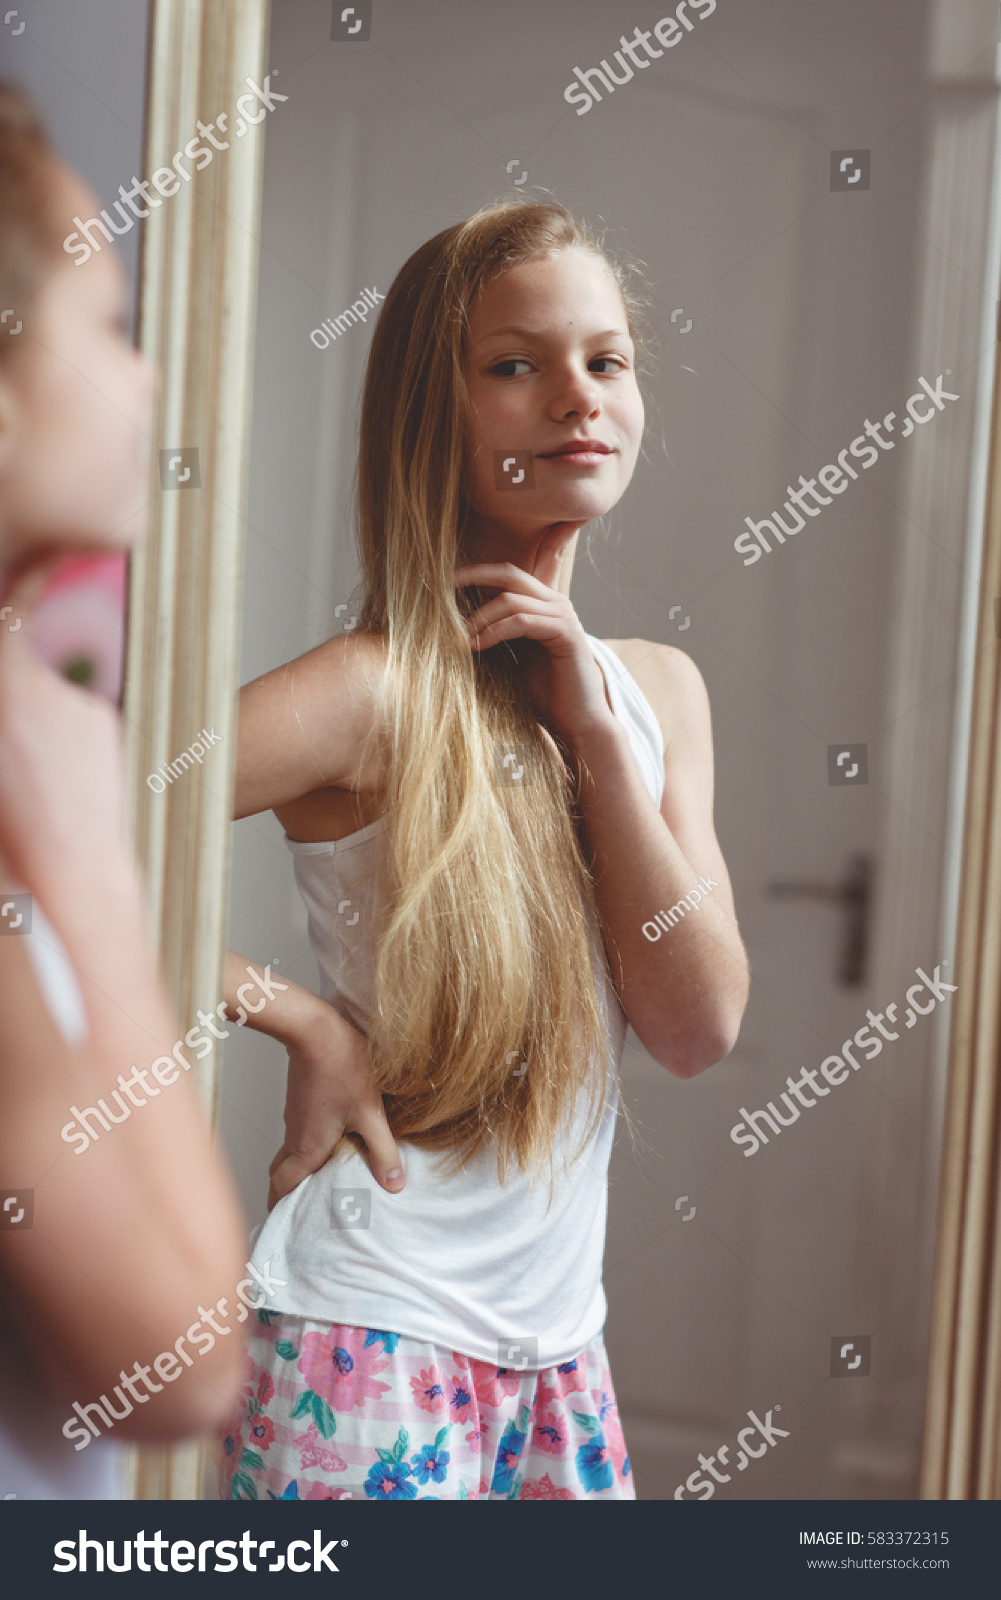 Legal Age Teenager showing her body in a mirror